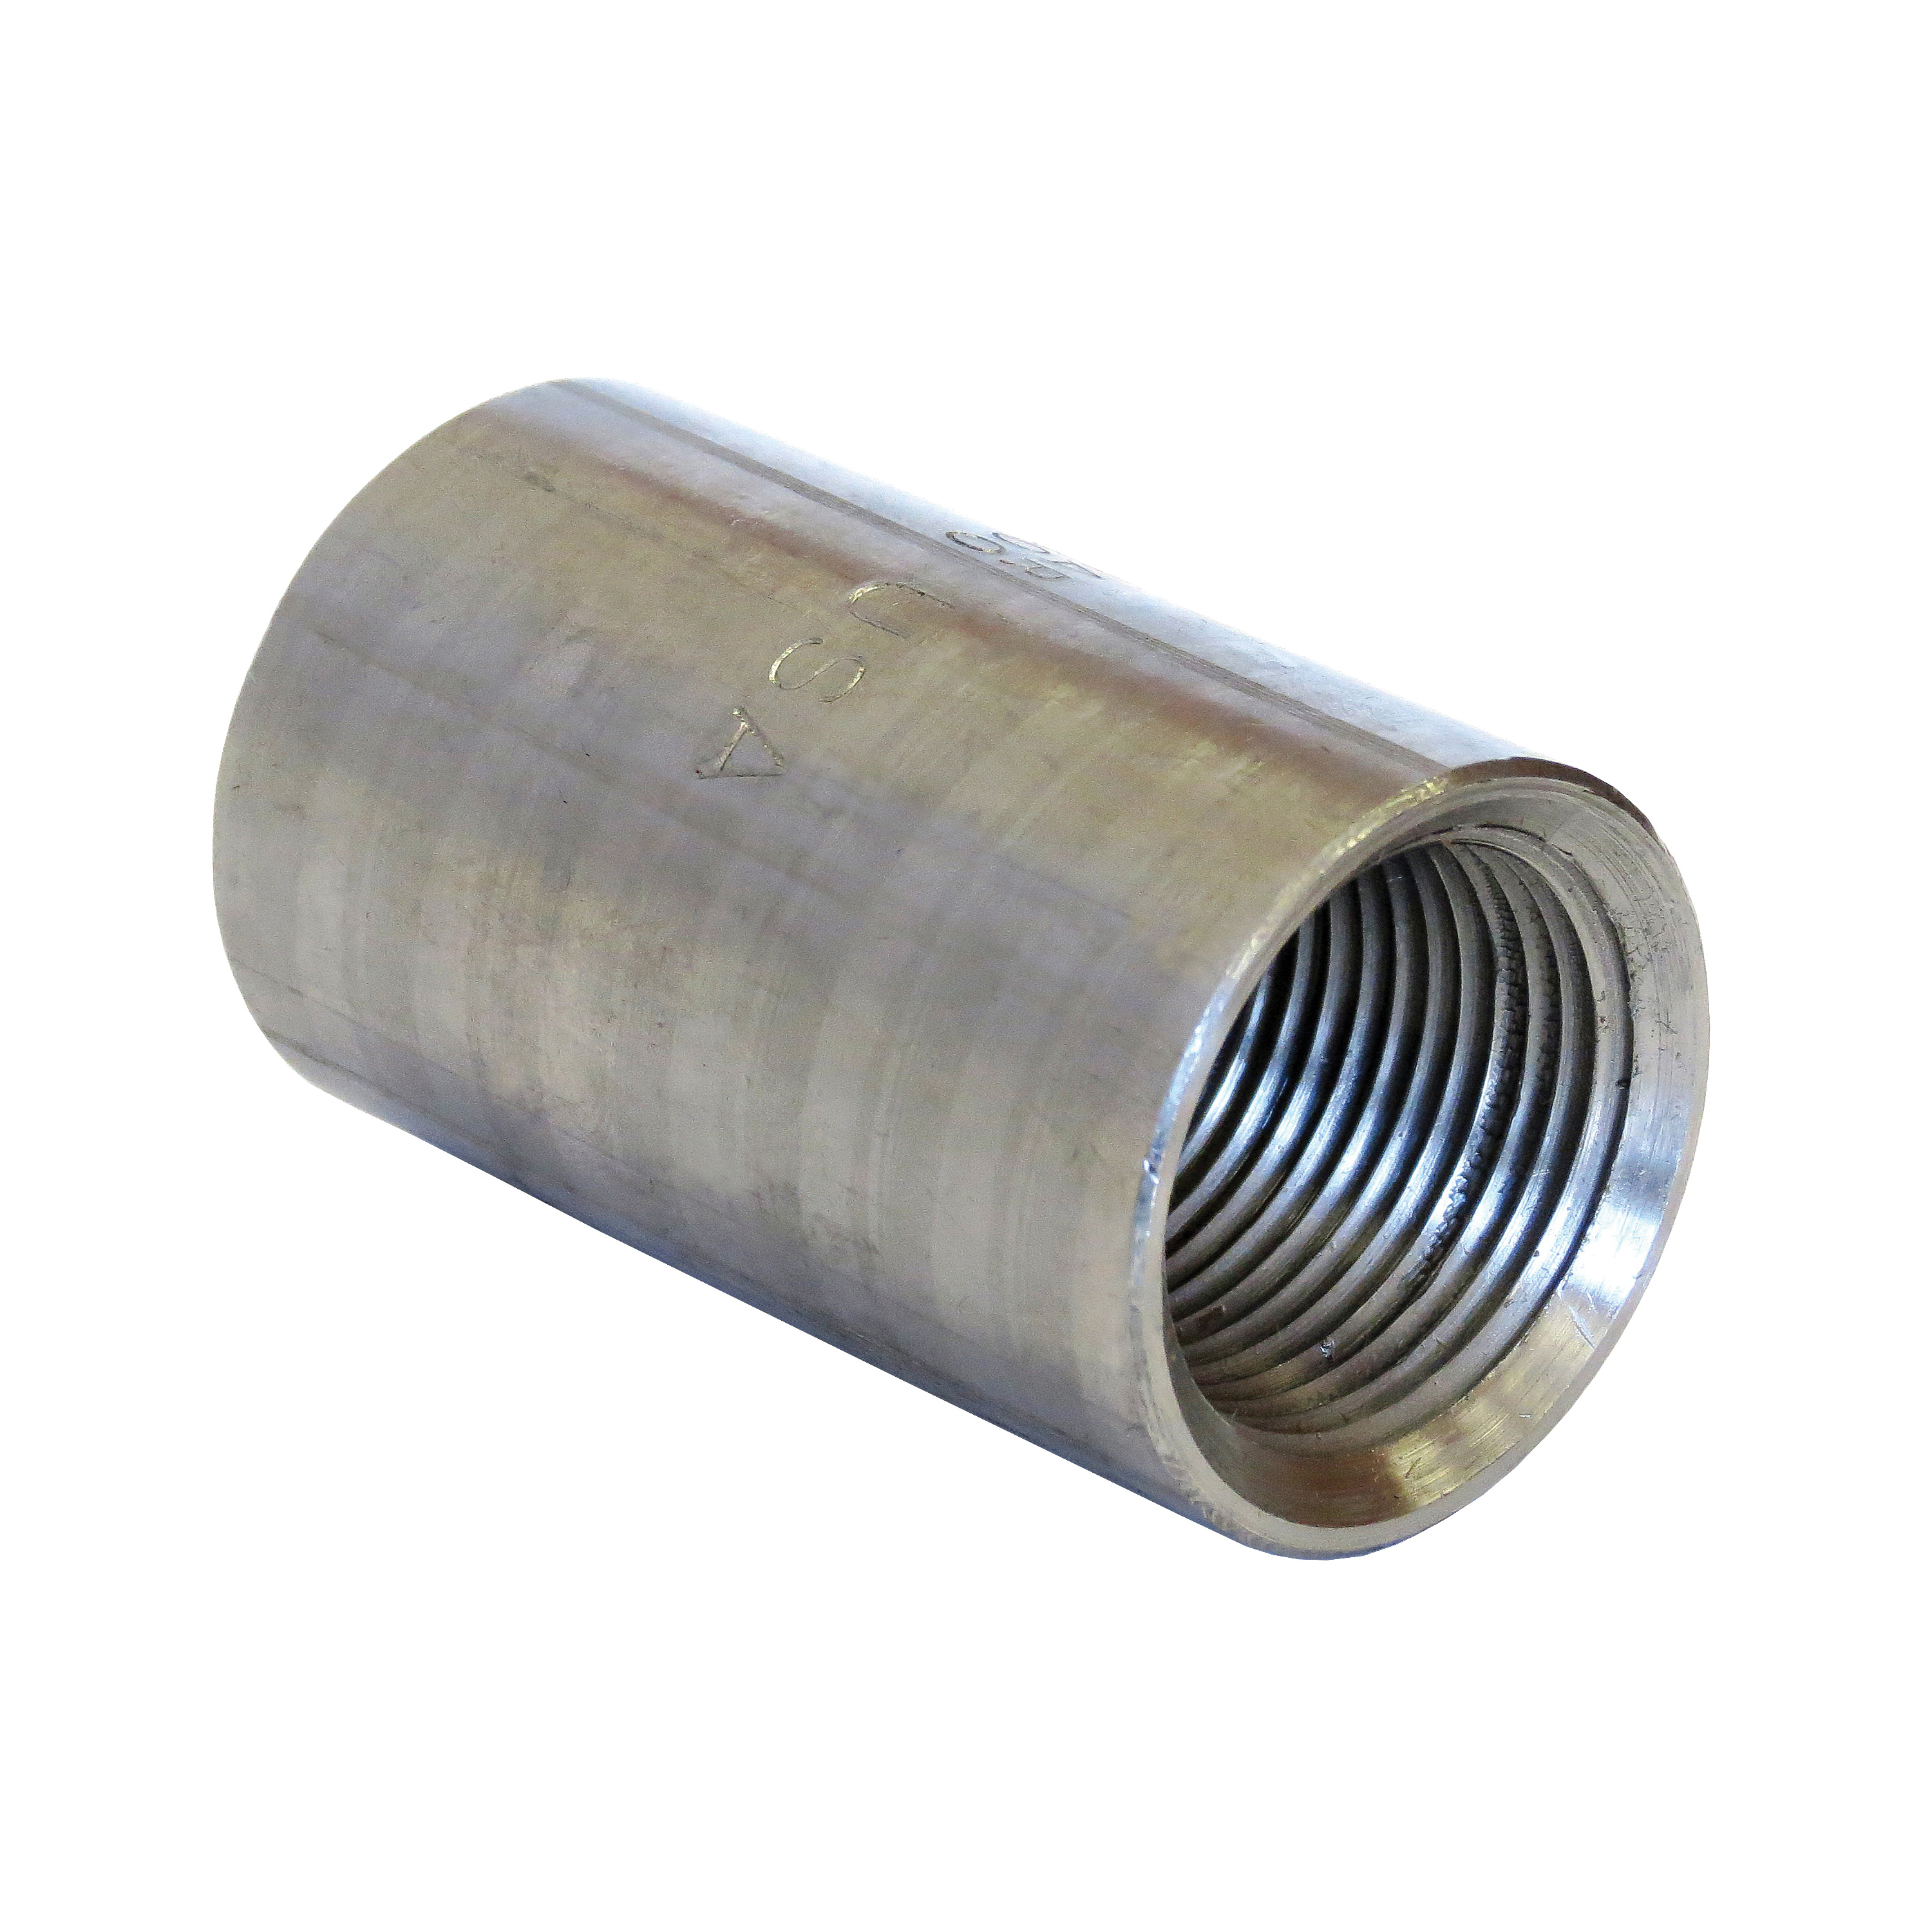 0321200545 FIG 337 Taper Tapped Non-Recessed Full Coupling, Steel, 2-1/2 in, SCH 80/XH and SCH XS, NPT, Galvanized, Domestic